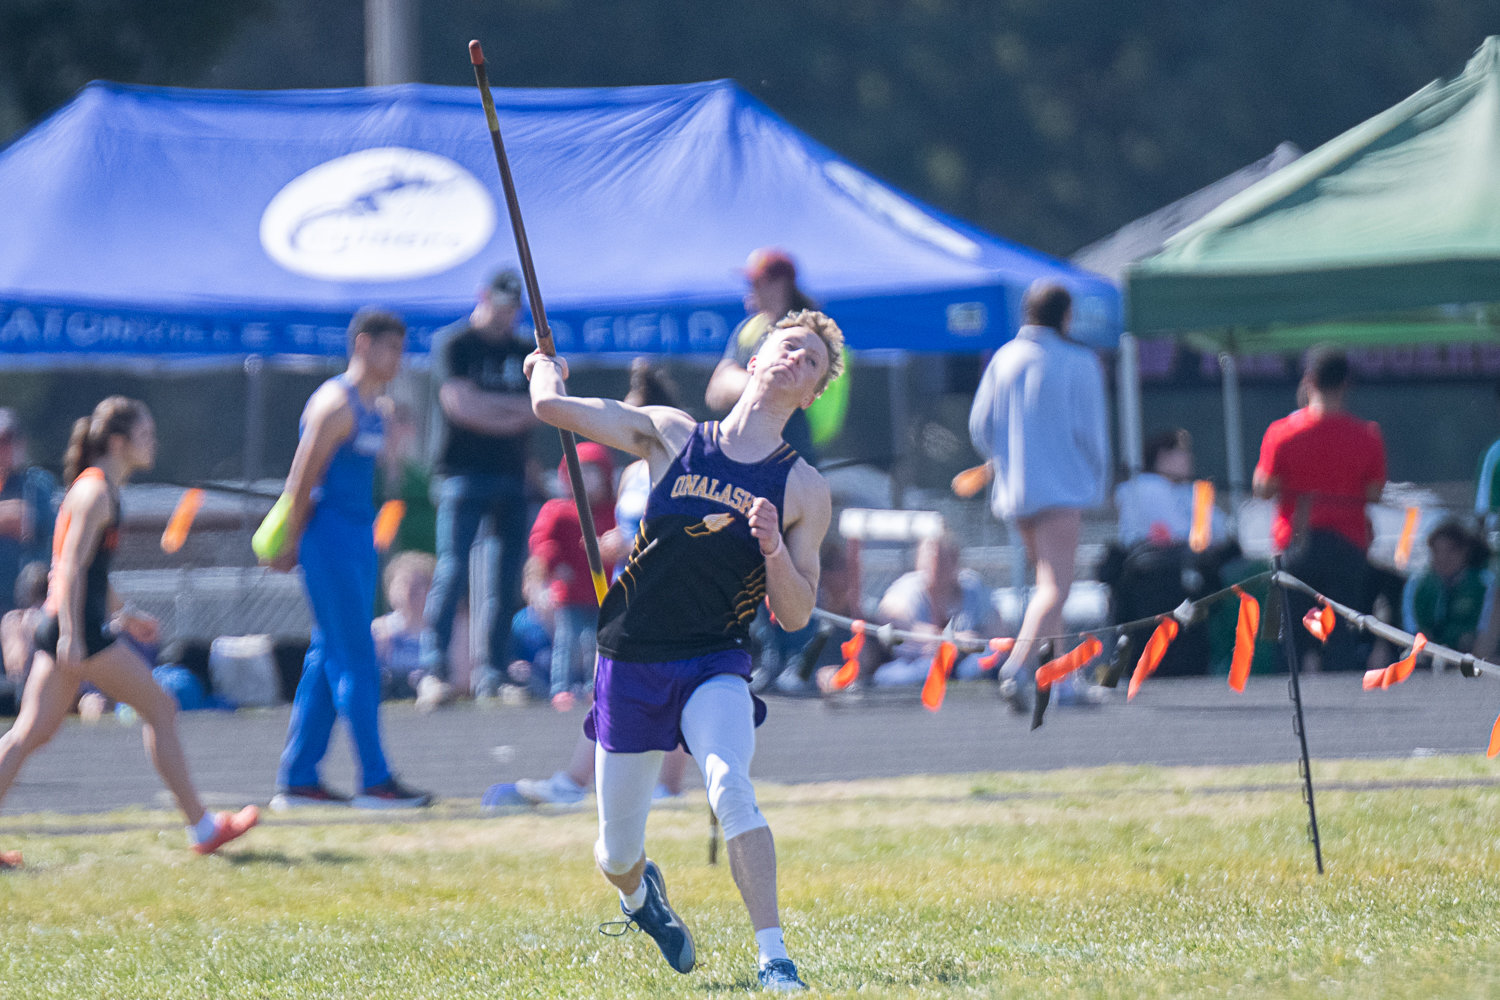 Ben Russon throws the javelin for Onalaska at the Rainier Icebreaker on March 18.